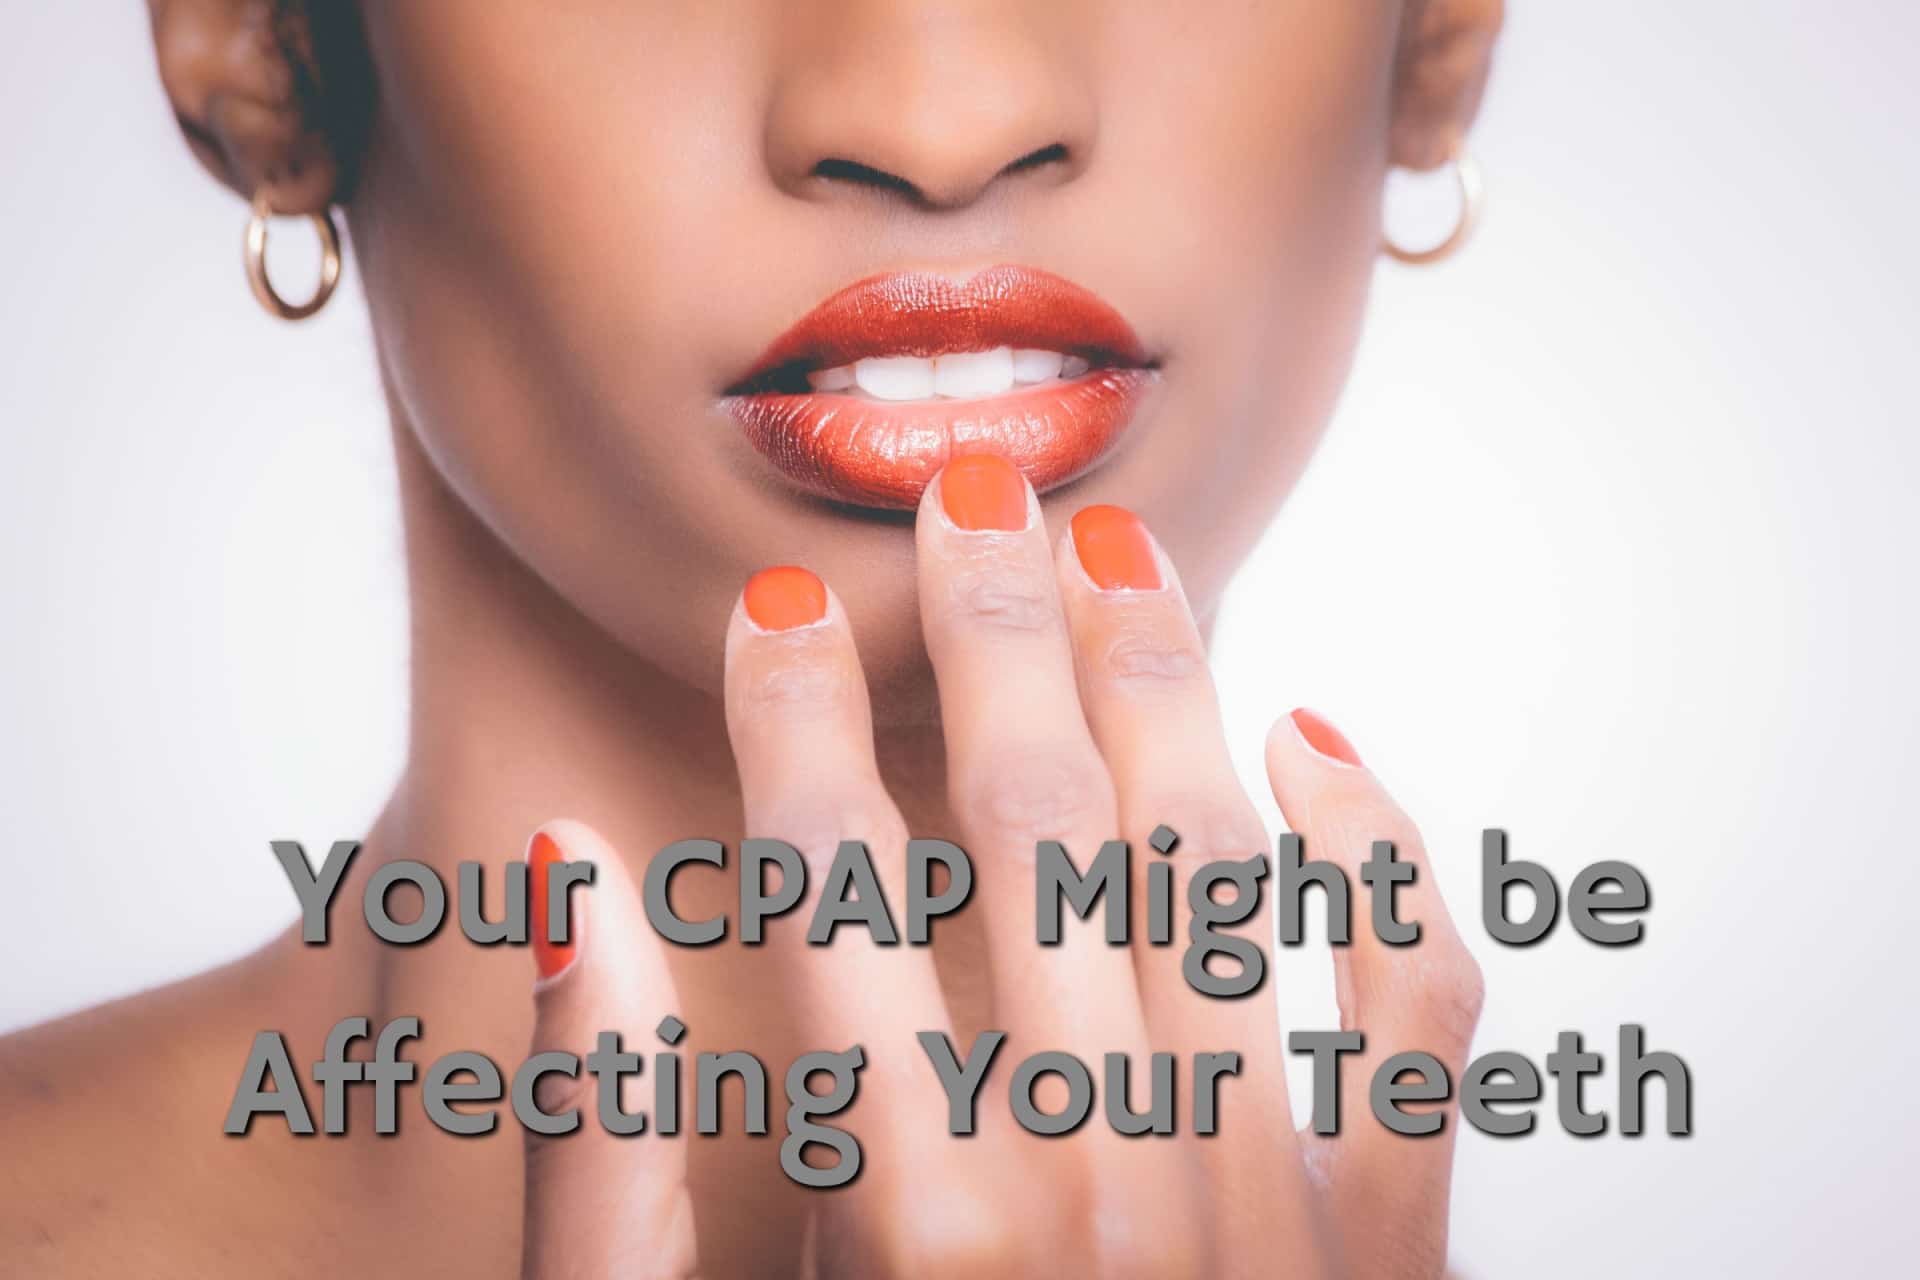 Your CPAP Might be Affecting Your Teeth